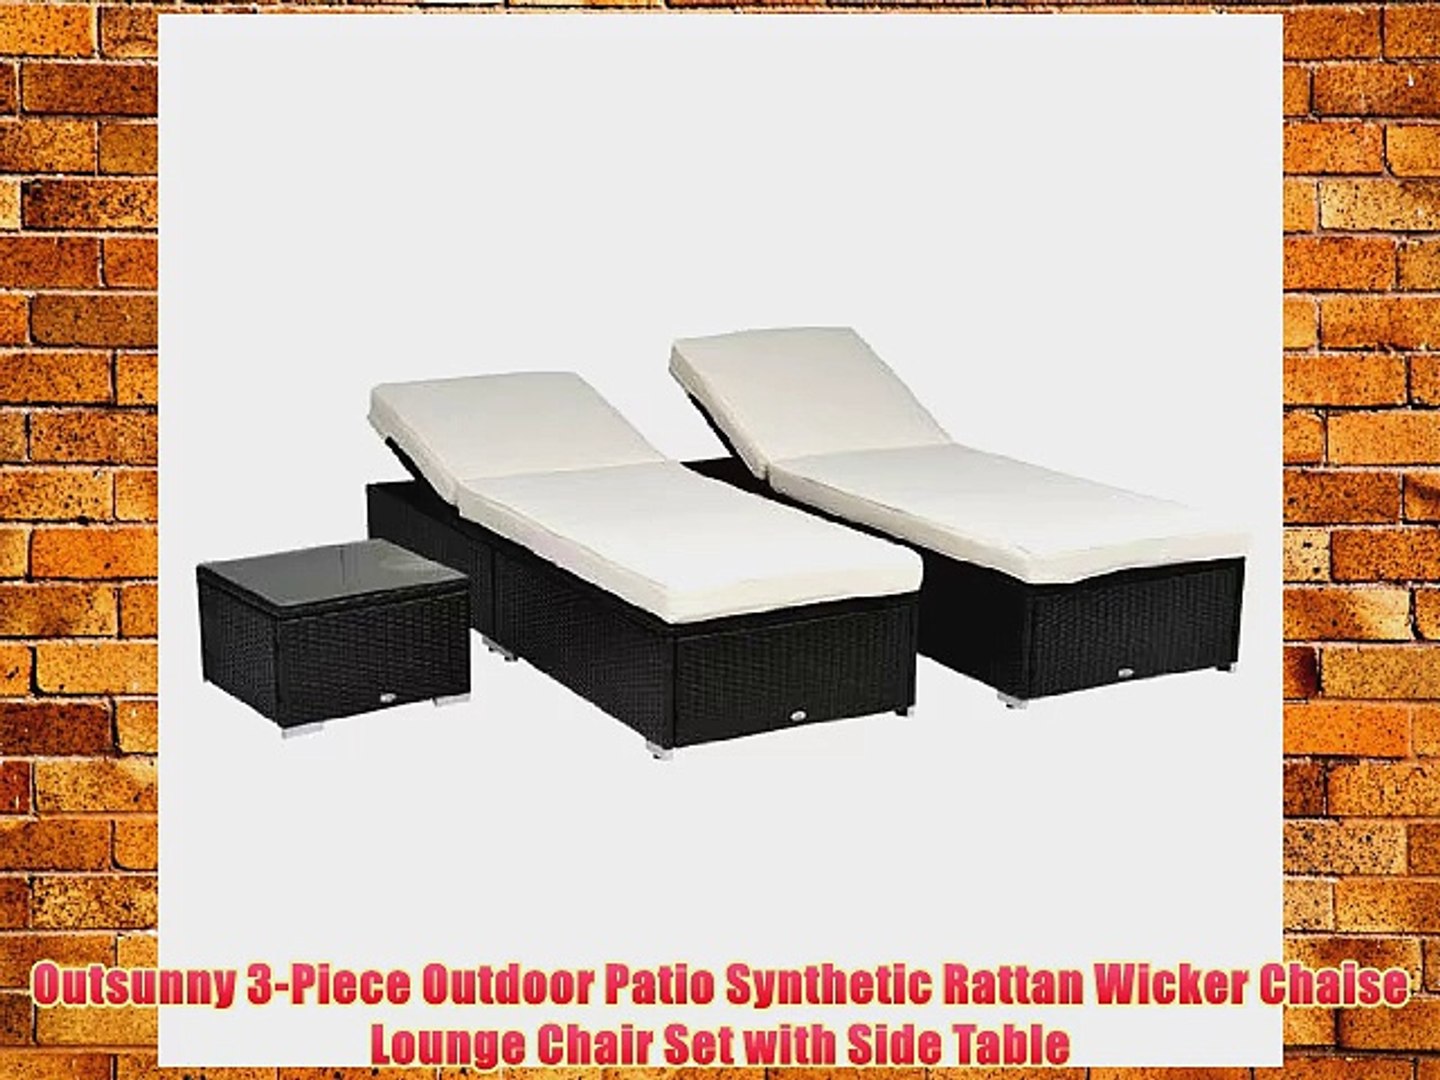 Festnight Set of 2 Outdoor Patio Wicker Chaise Lounge Chair,1 Table type2 W/Cushions Sun Lounger Set Poly Rattan 